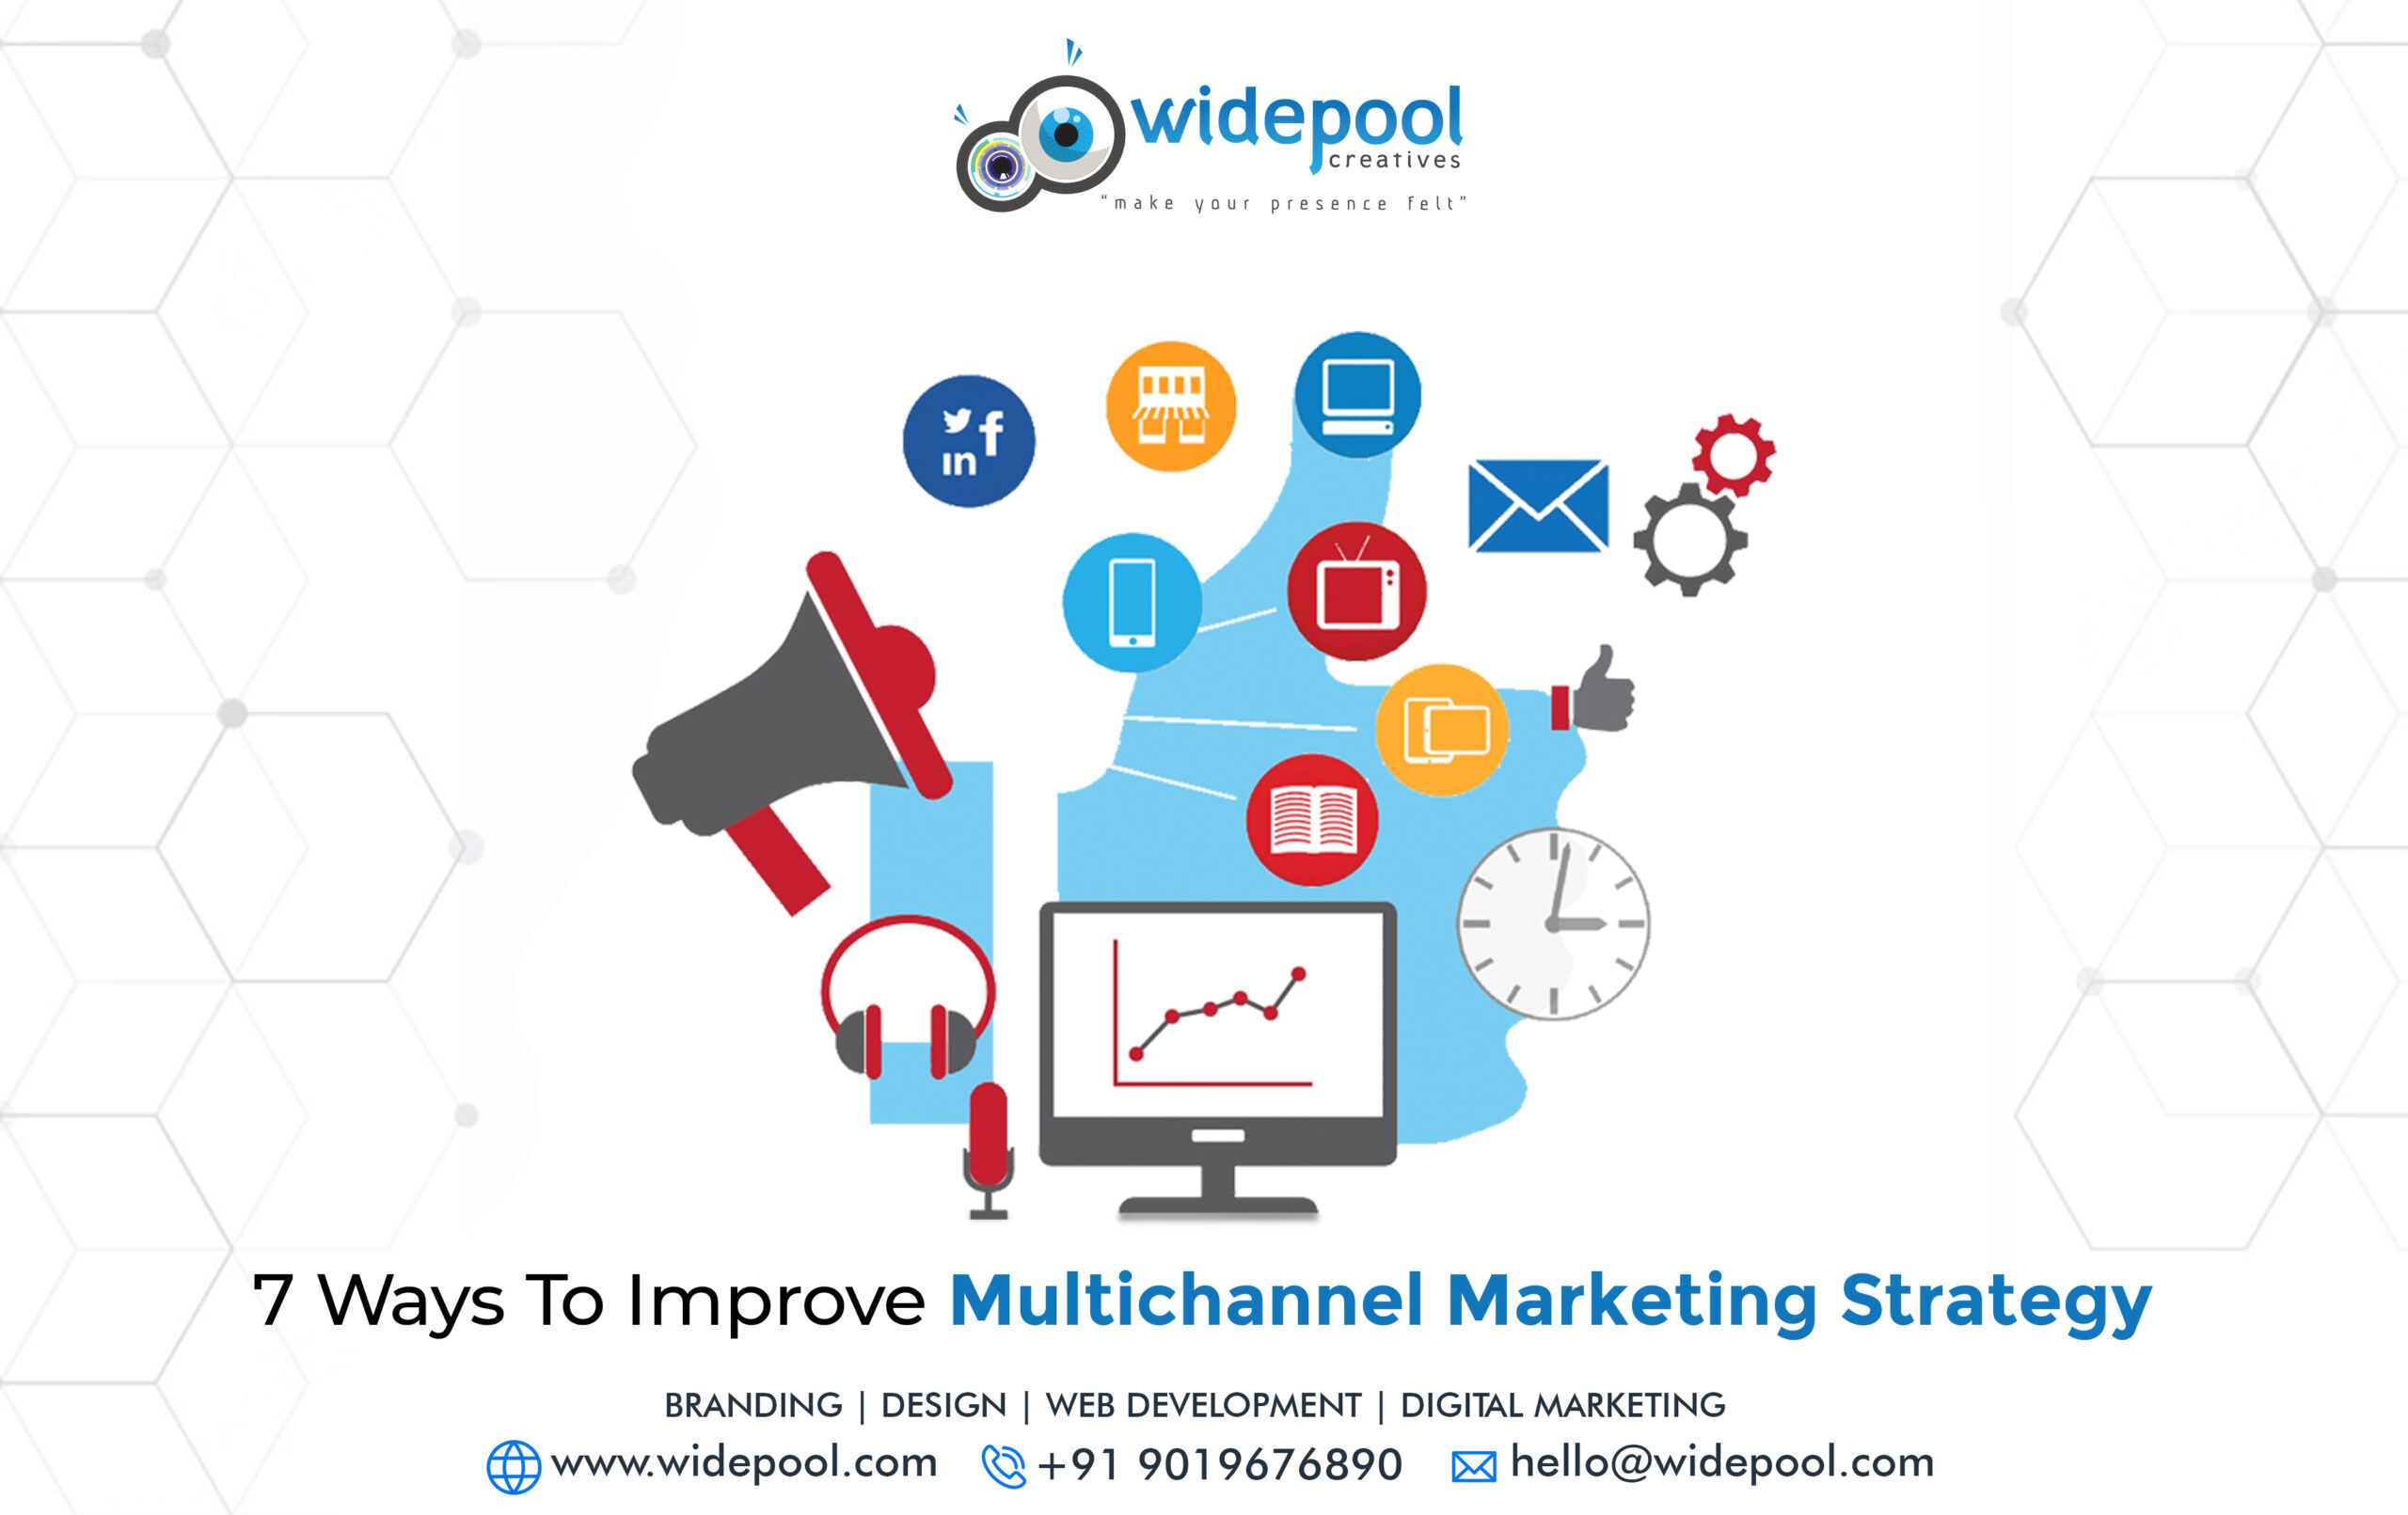 7 Ways to Improve Multichannel Marketing Strategy